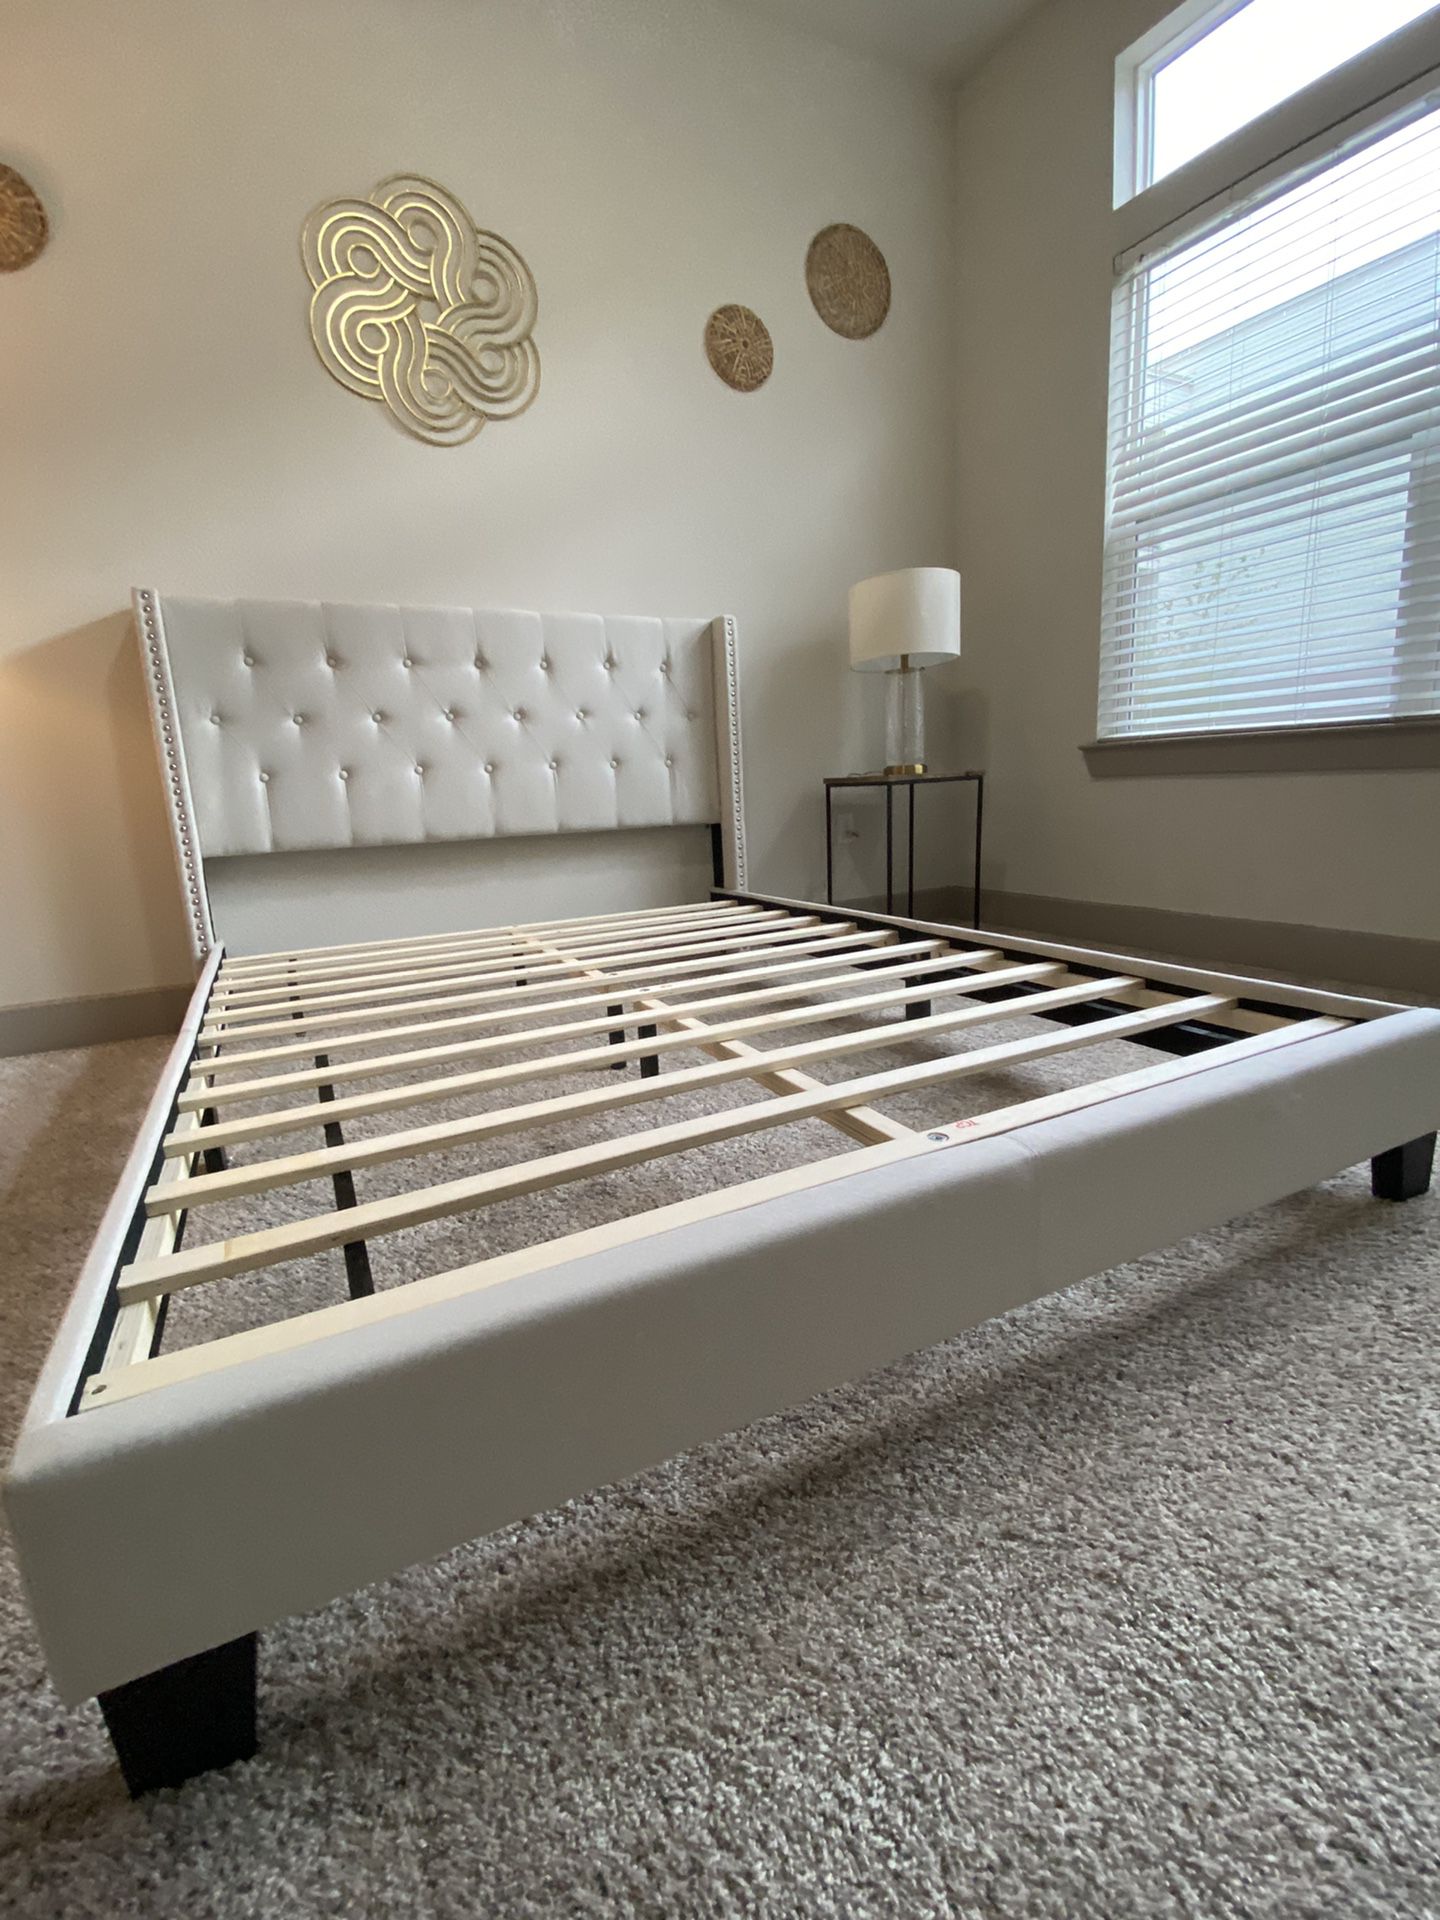 New Queen Platform Bed Frame- New In Box